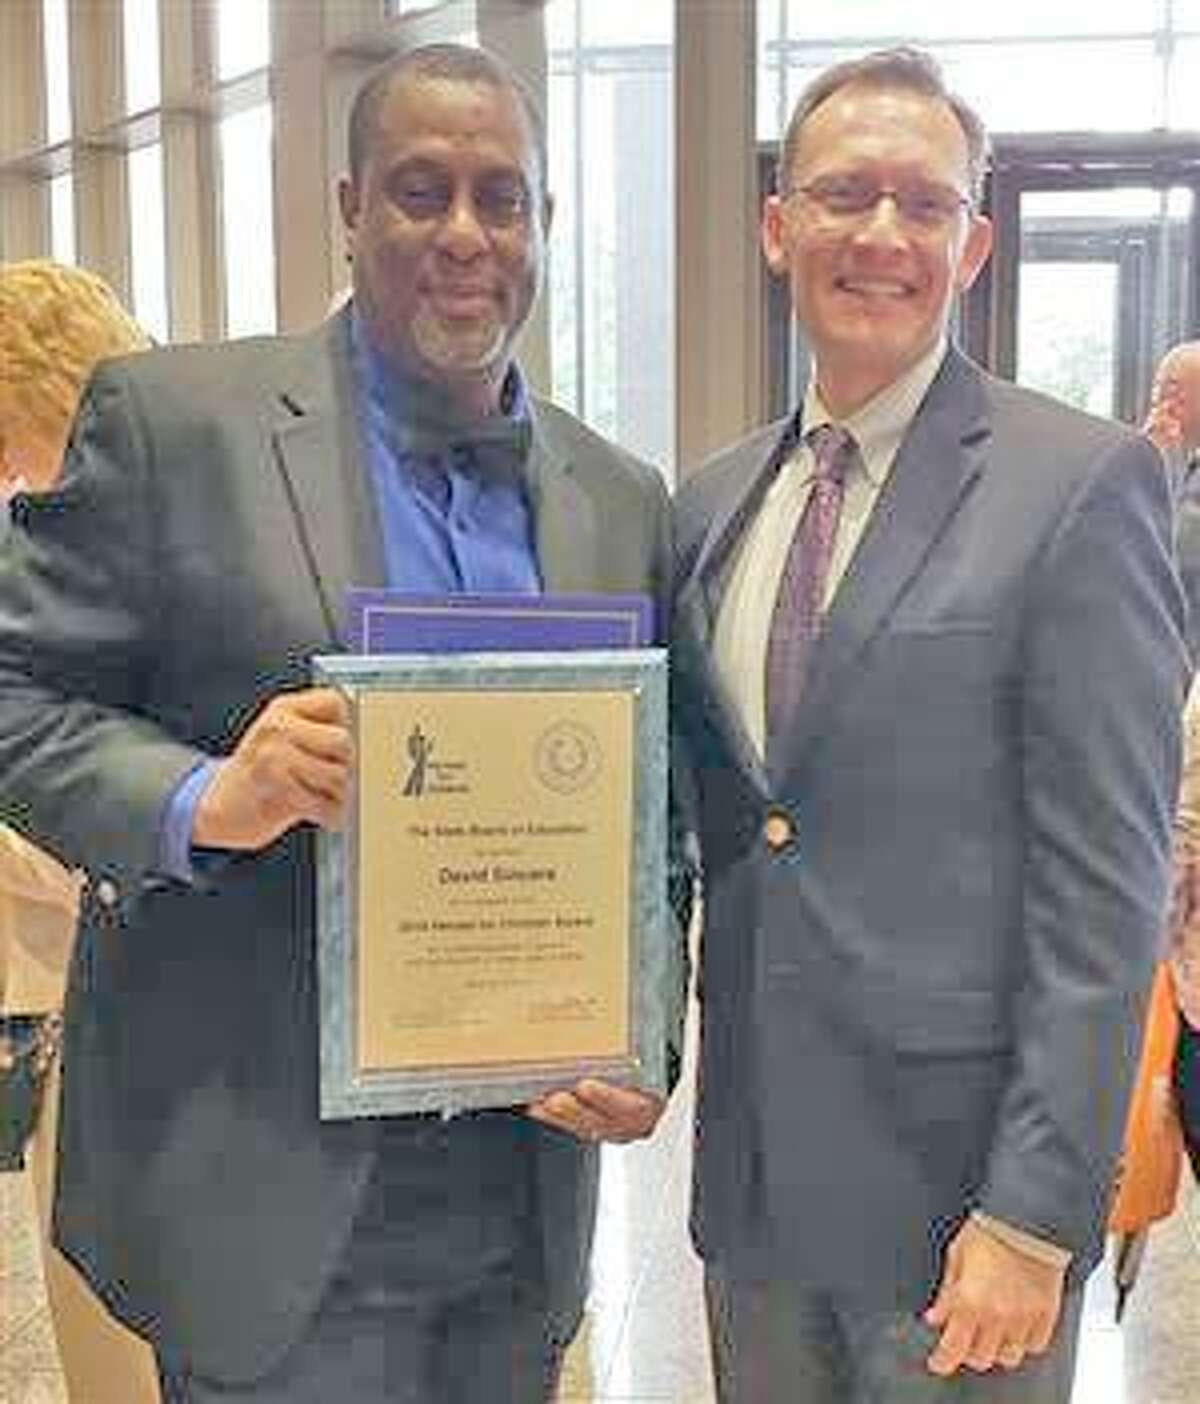 Pastor David Sincere Jr. (left) was recently awarded the 2018 the 2018 Heroes for Children Award by the State Board of Education. Sincere and Anthony Indelicato, FBISD assistant superintendent of school improvement (pictured right) attended an awards ceremony in Austin.